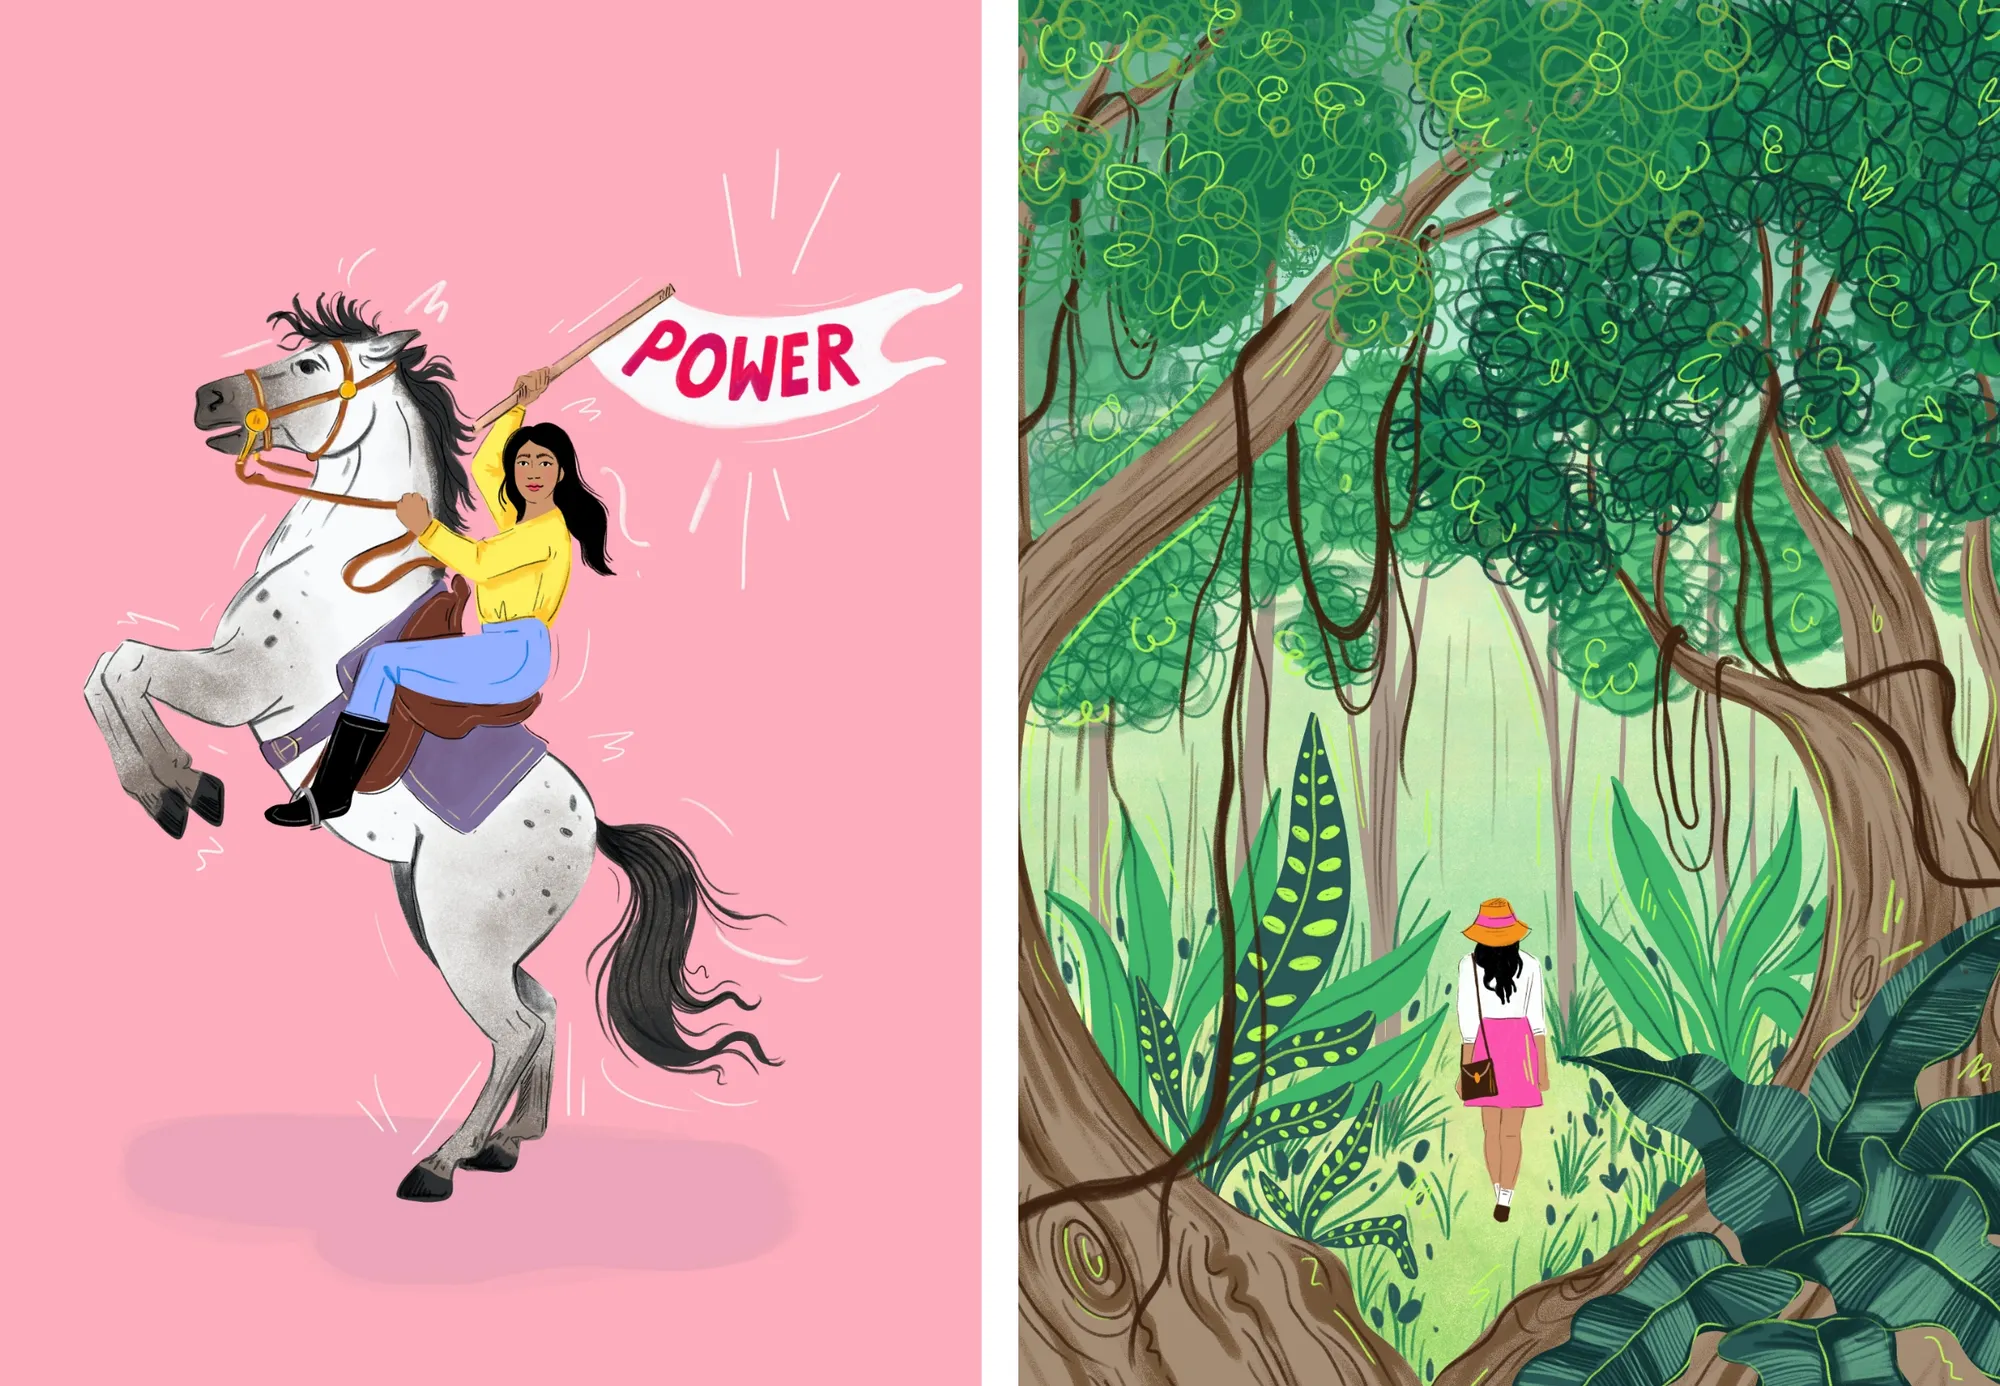 Left image: woman on horse with a flag. Right image: illustration of a woman in a forest.